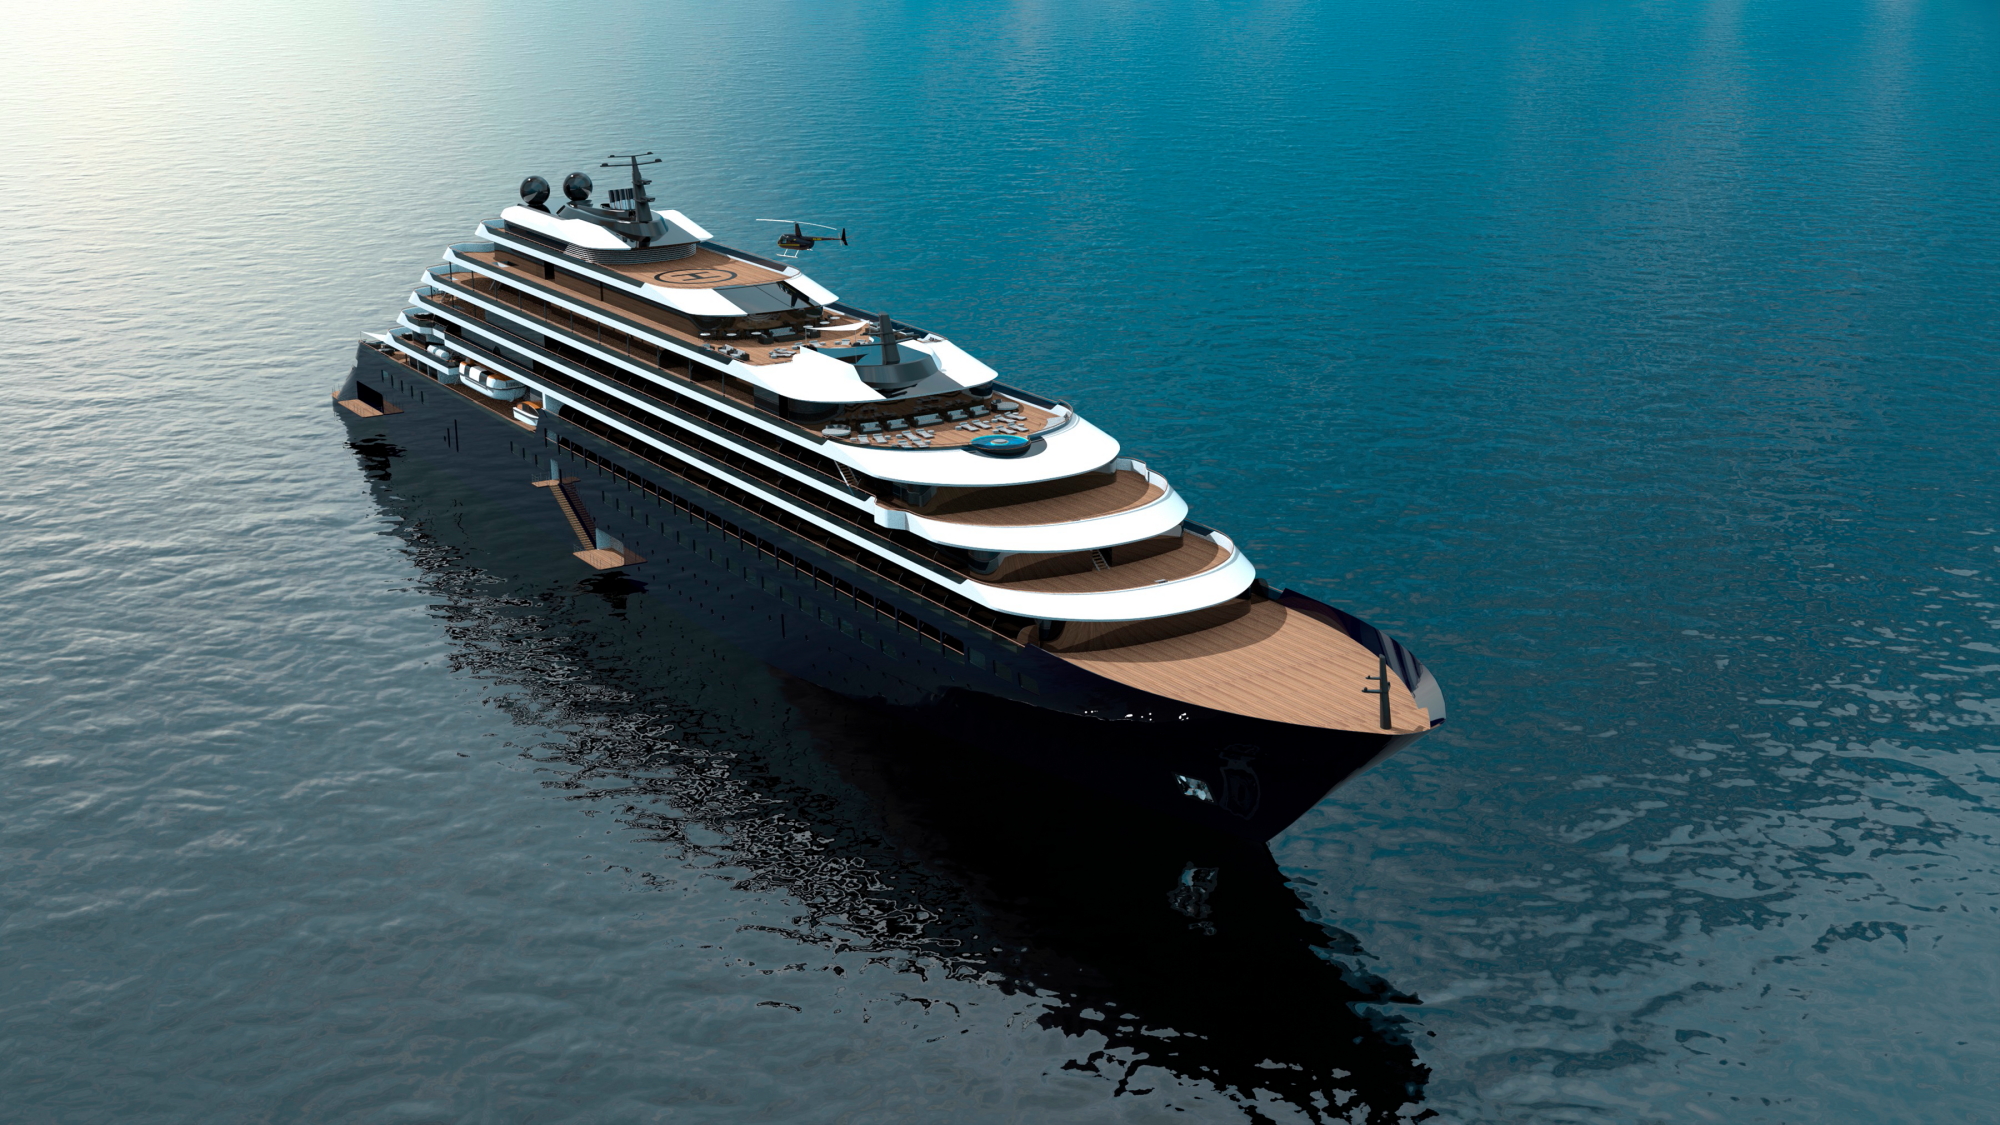 The inaugural Ritz-Carlton Yacht Collection ship will cruise a wide variety of destinations depending on the season, including the Mediterranean, Northern Europe, the Caribbean and Latin America. The vessels will measure 190-meters and feature 149 luxury suites to accommodate up to 298 passengers. Click to enlarge.